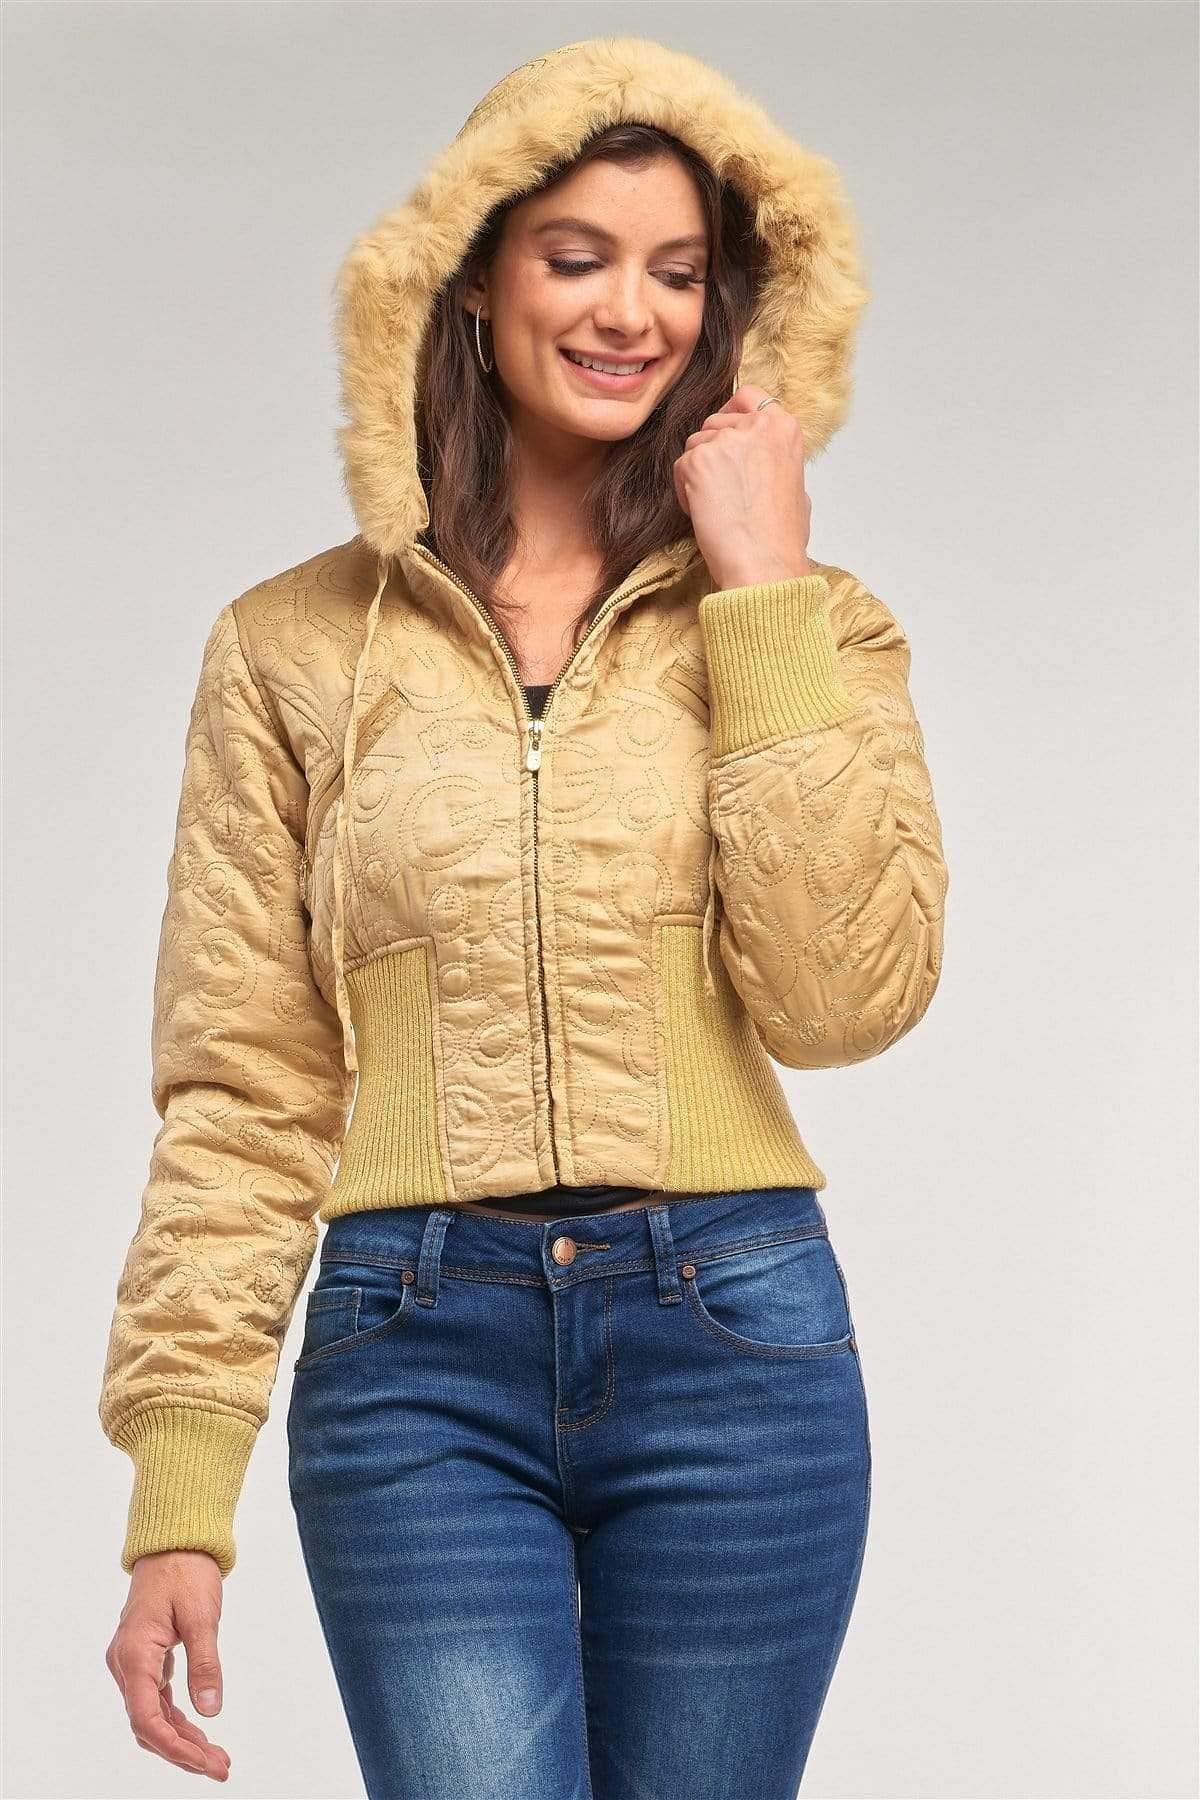 Gold Long Sleeve Faux Fur Winter Bomber Jacket - Shopping Therapy, LLC Jackets